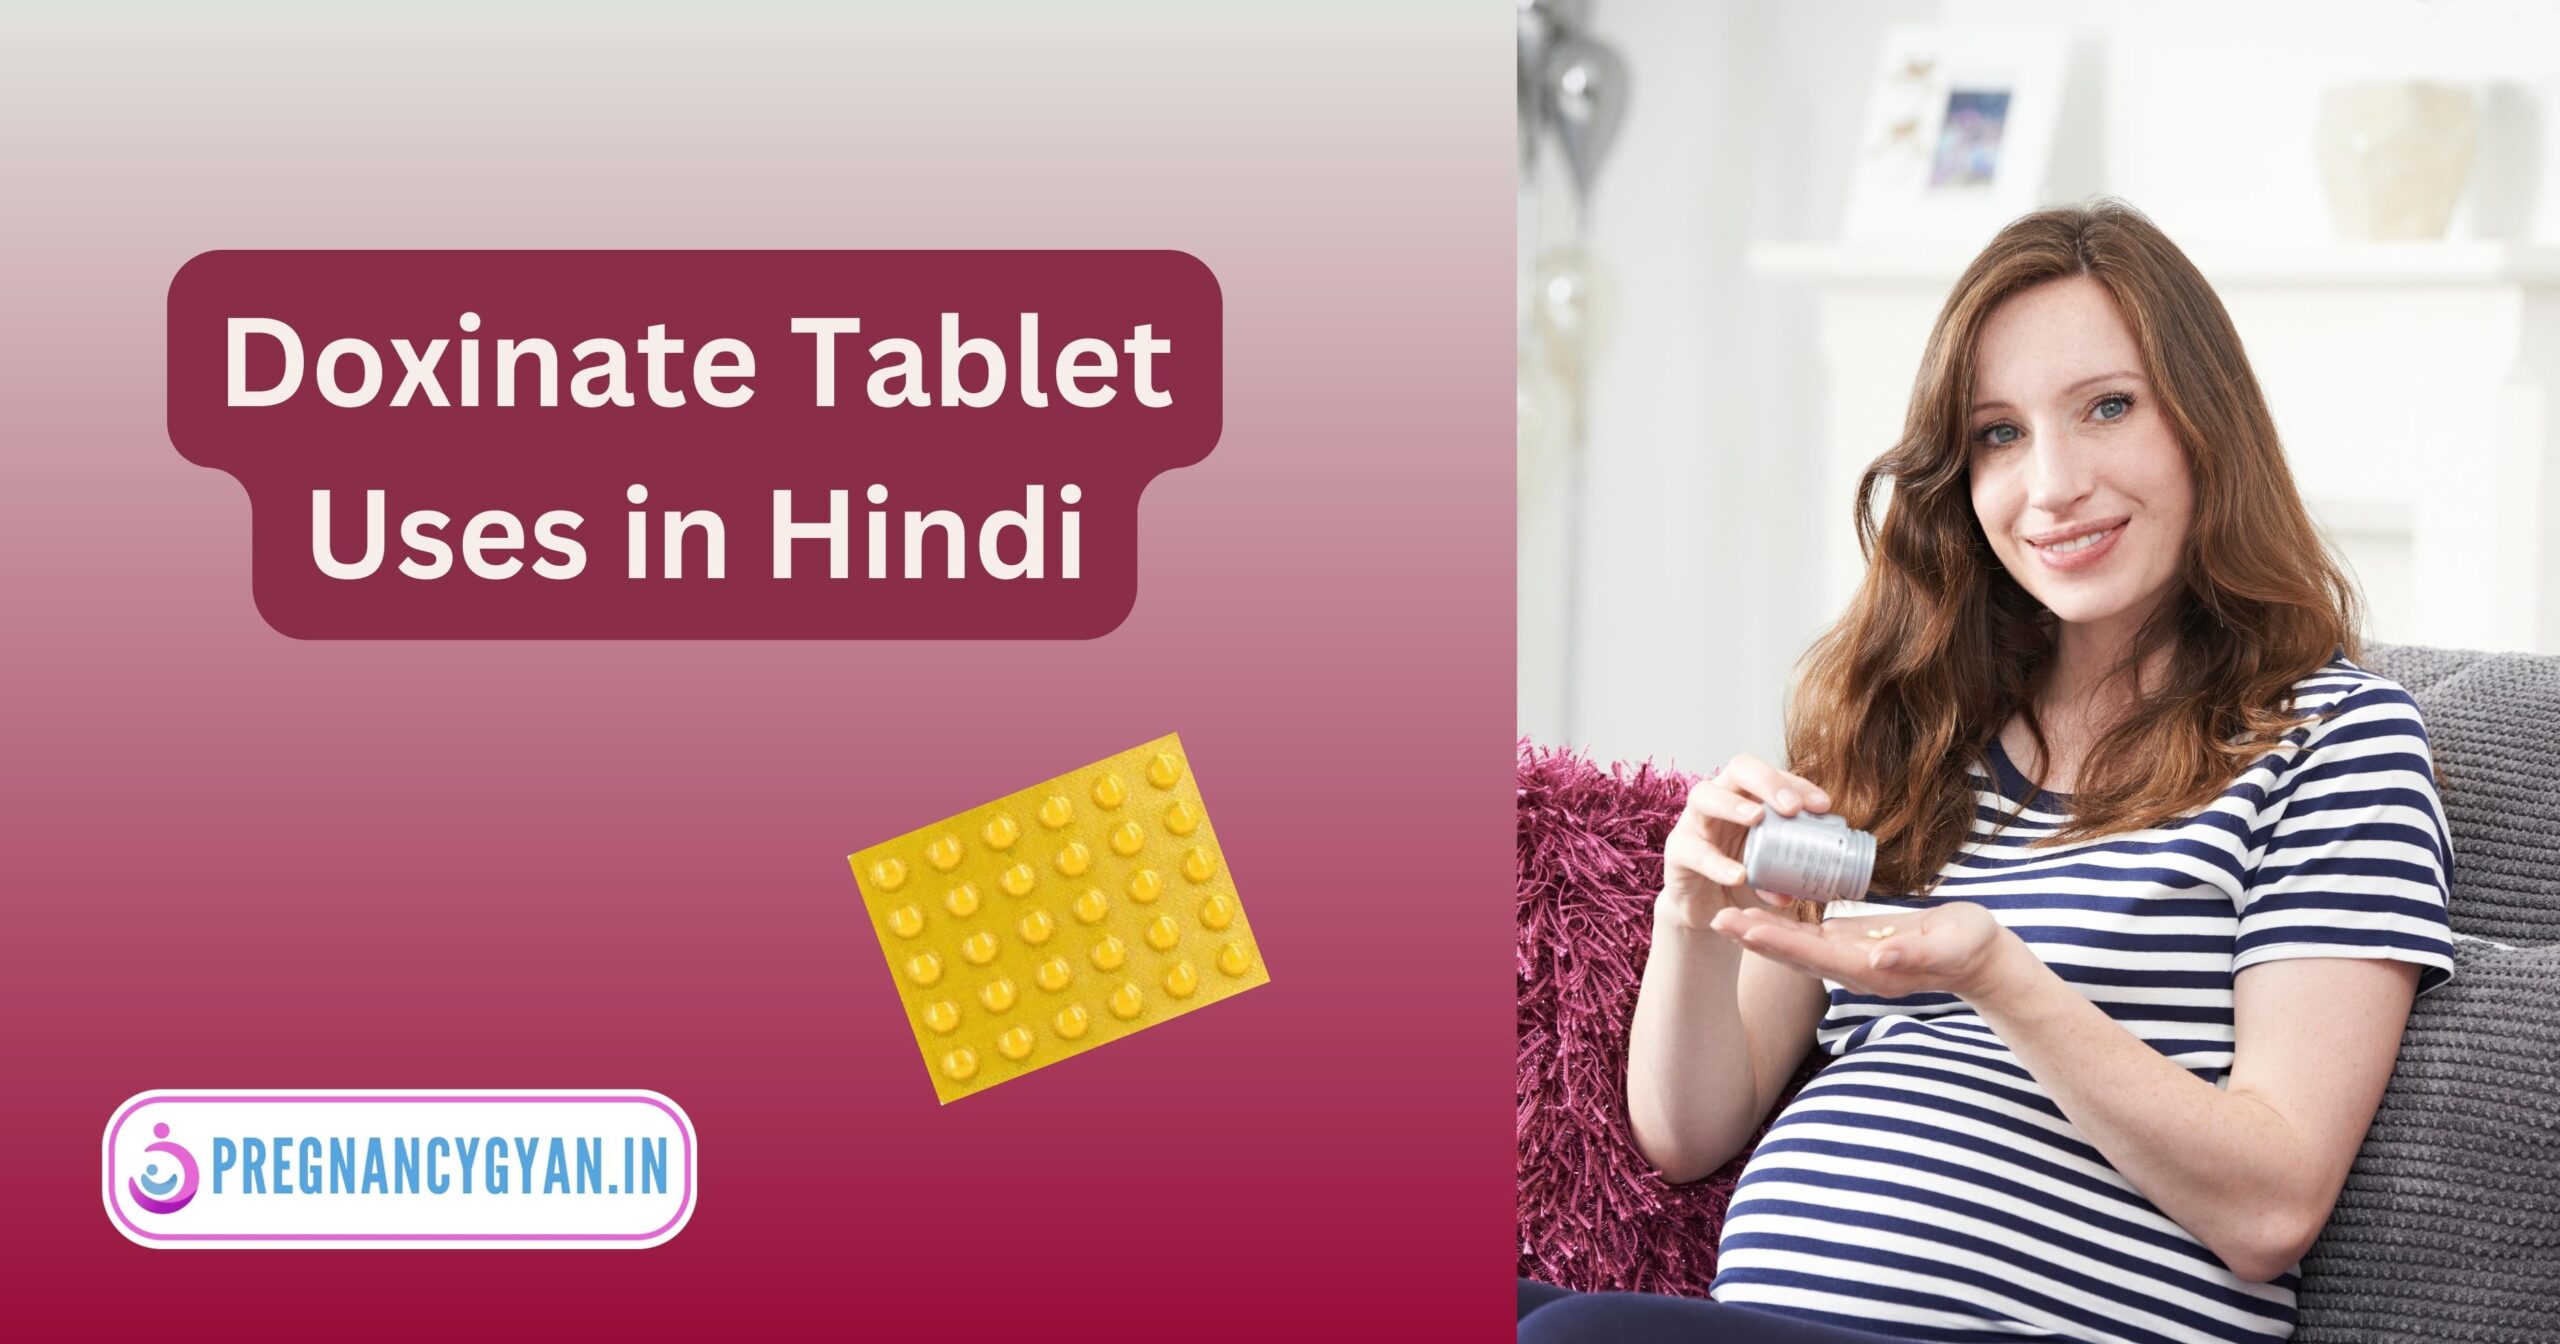 Doxinate Tablet uses in Hindi